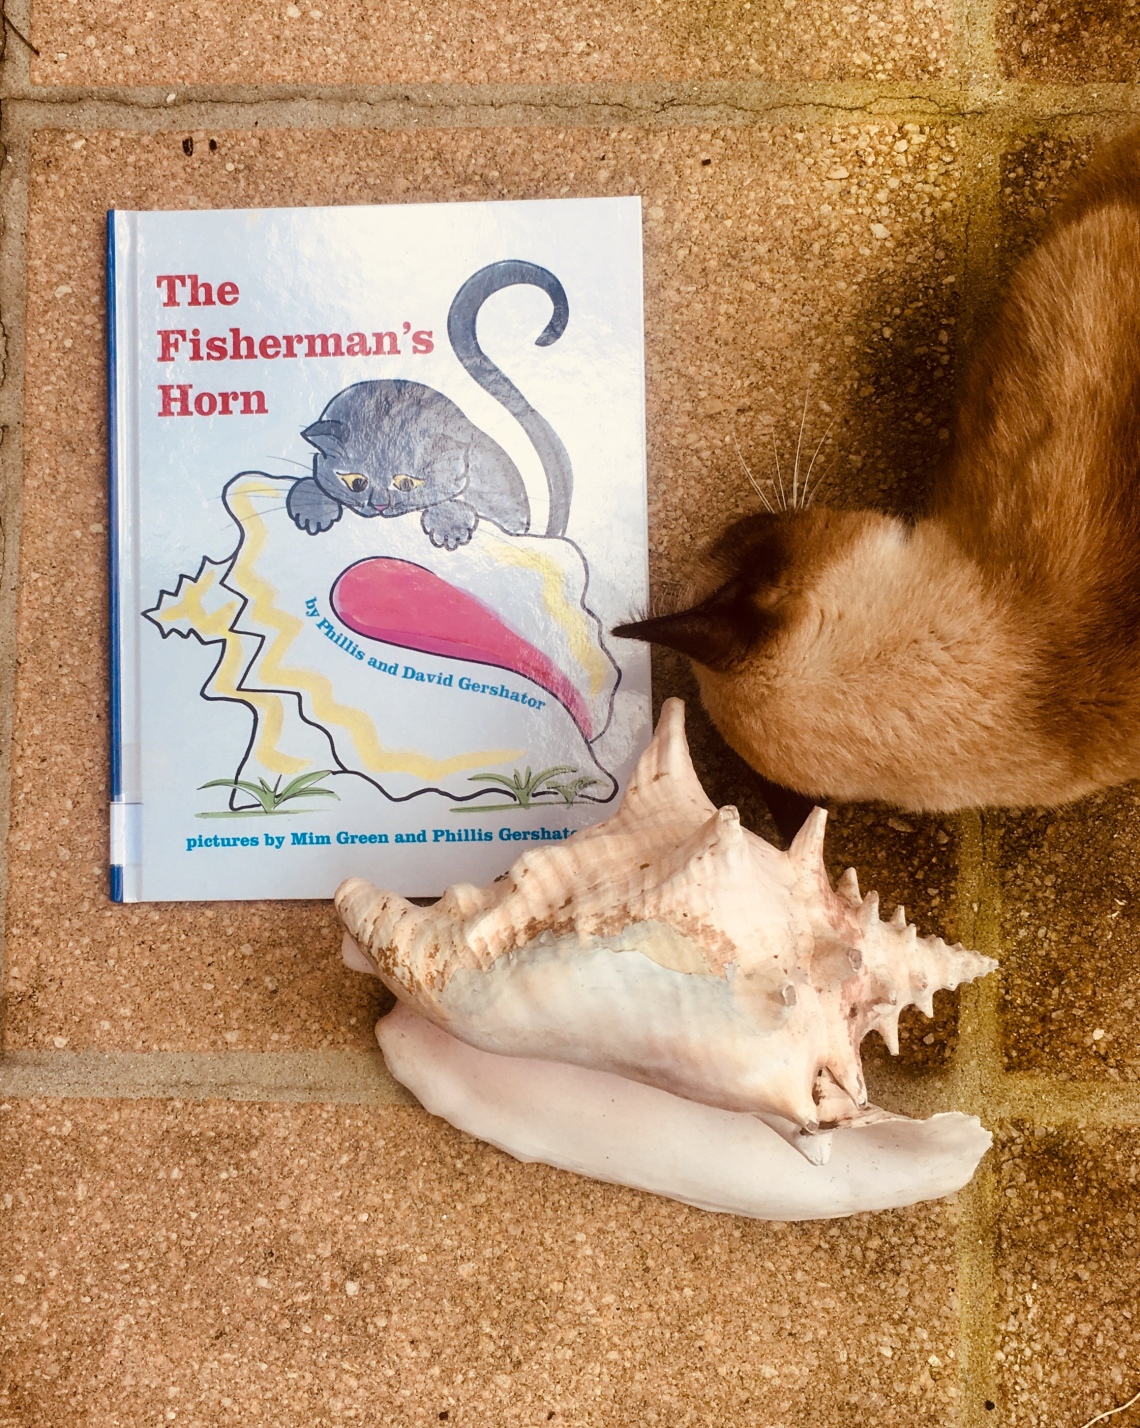 Book with conch shell and cat